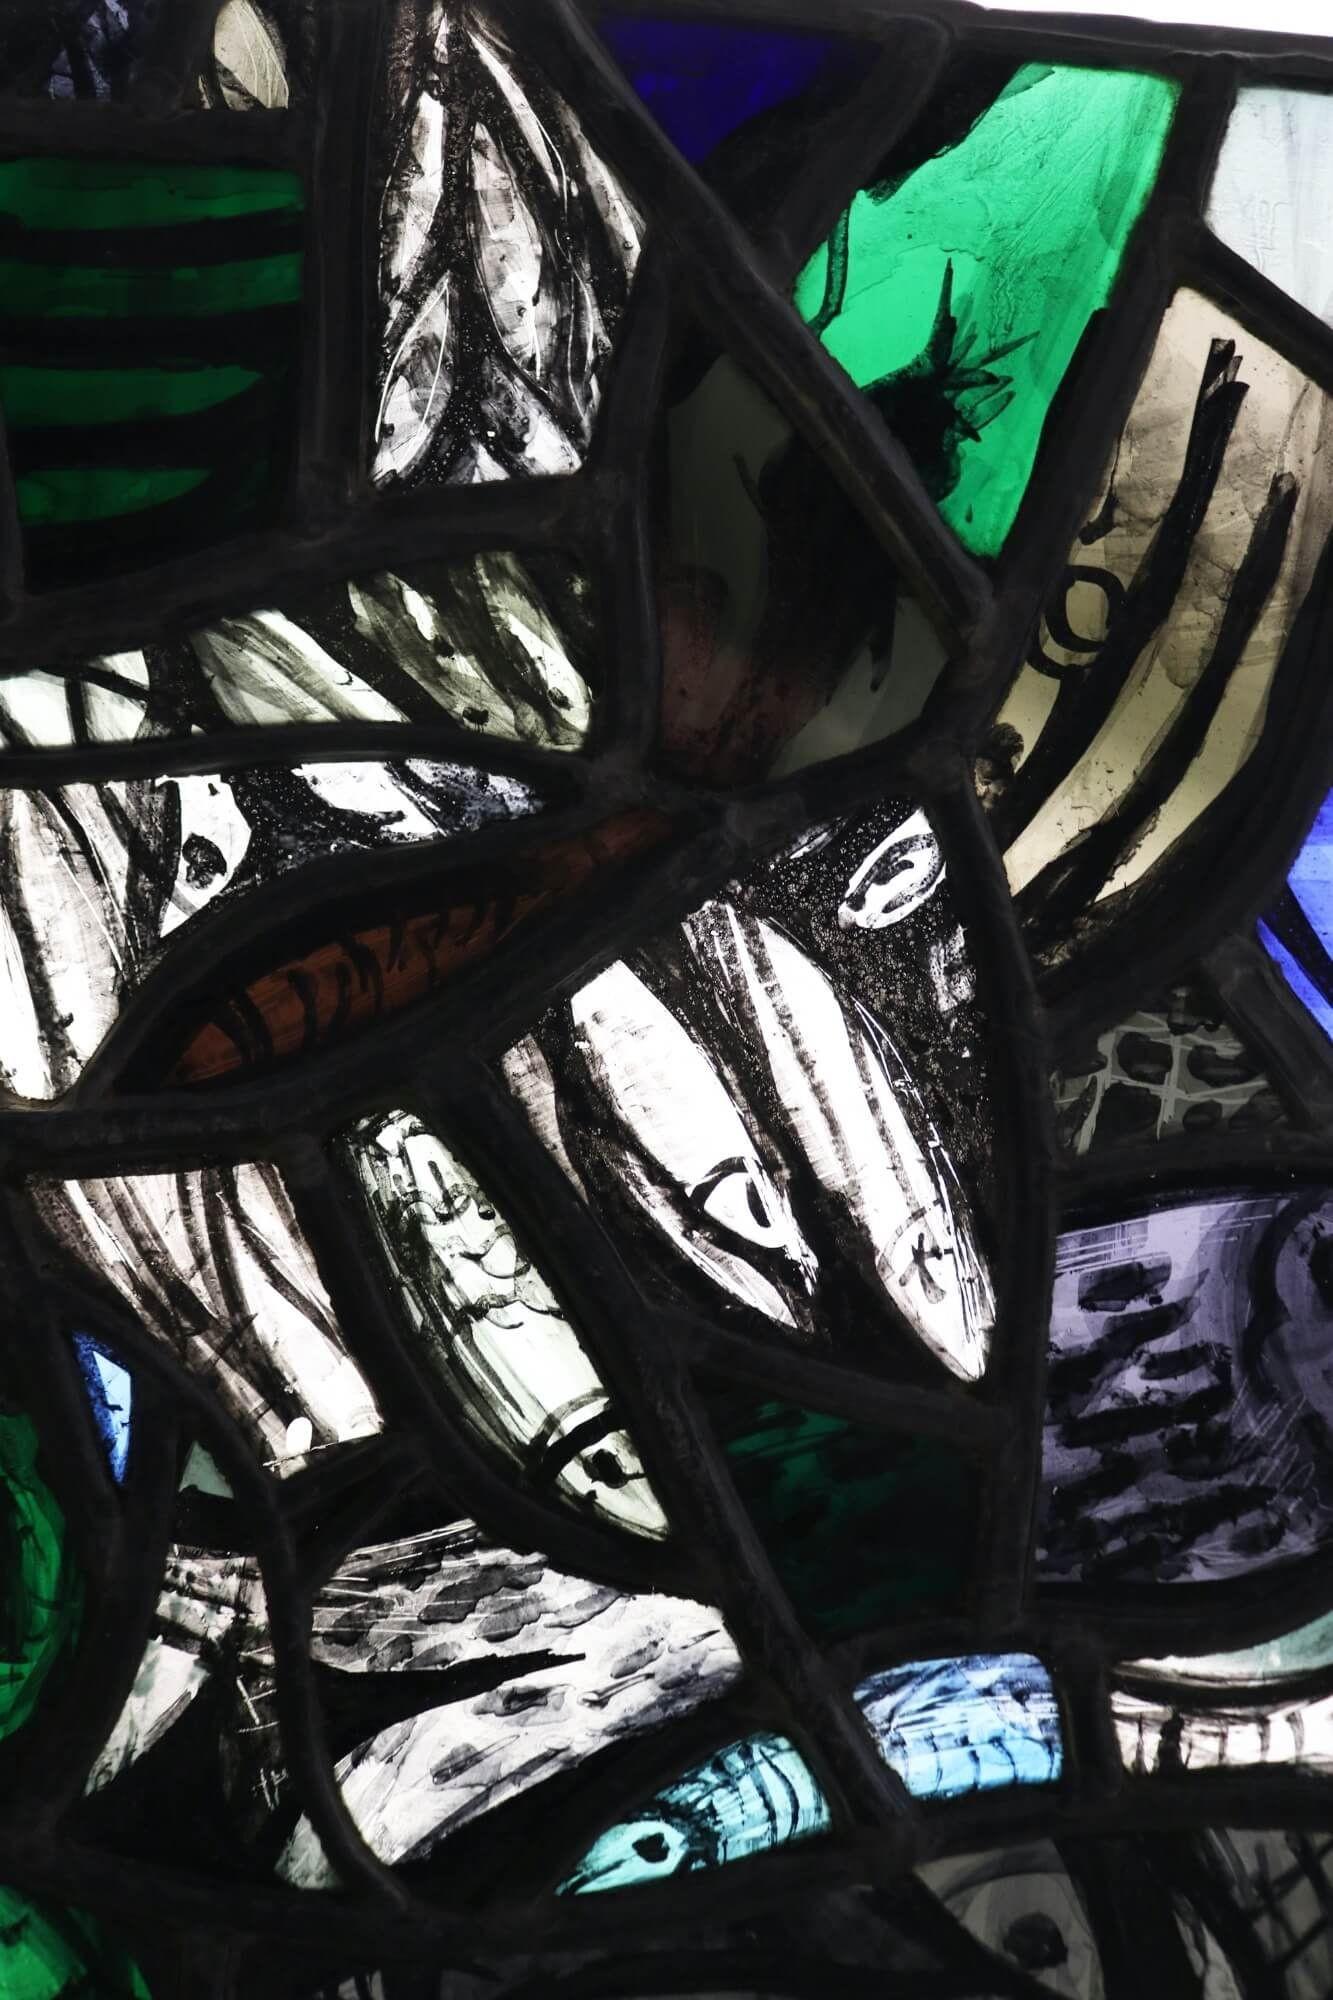 A contemporary stained glass window from the studio of Patrick Reyntiens (1925-2021). Attributed to the artist, this stained glass panel depicts what appears to be net or school of fish, possibly influenced by John Piper, with hand painted